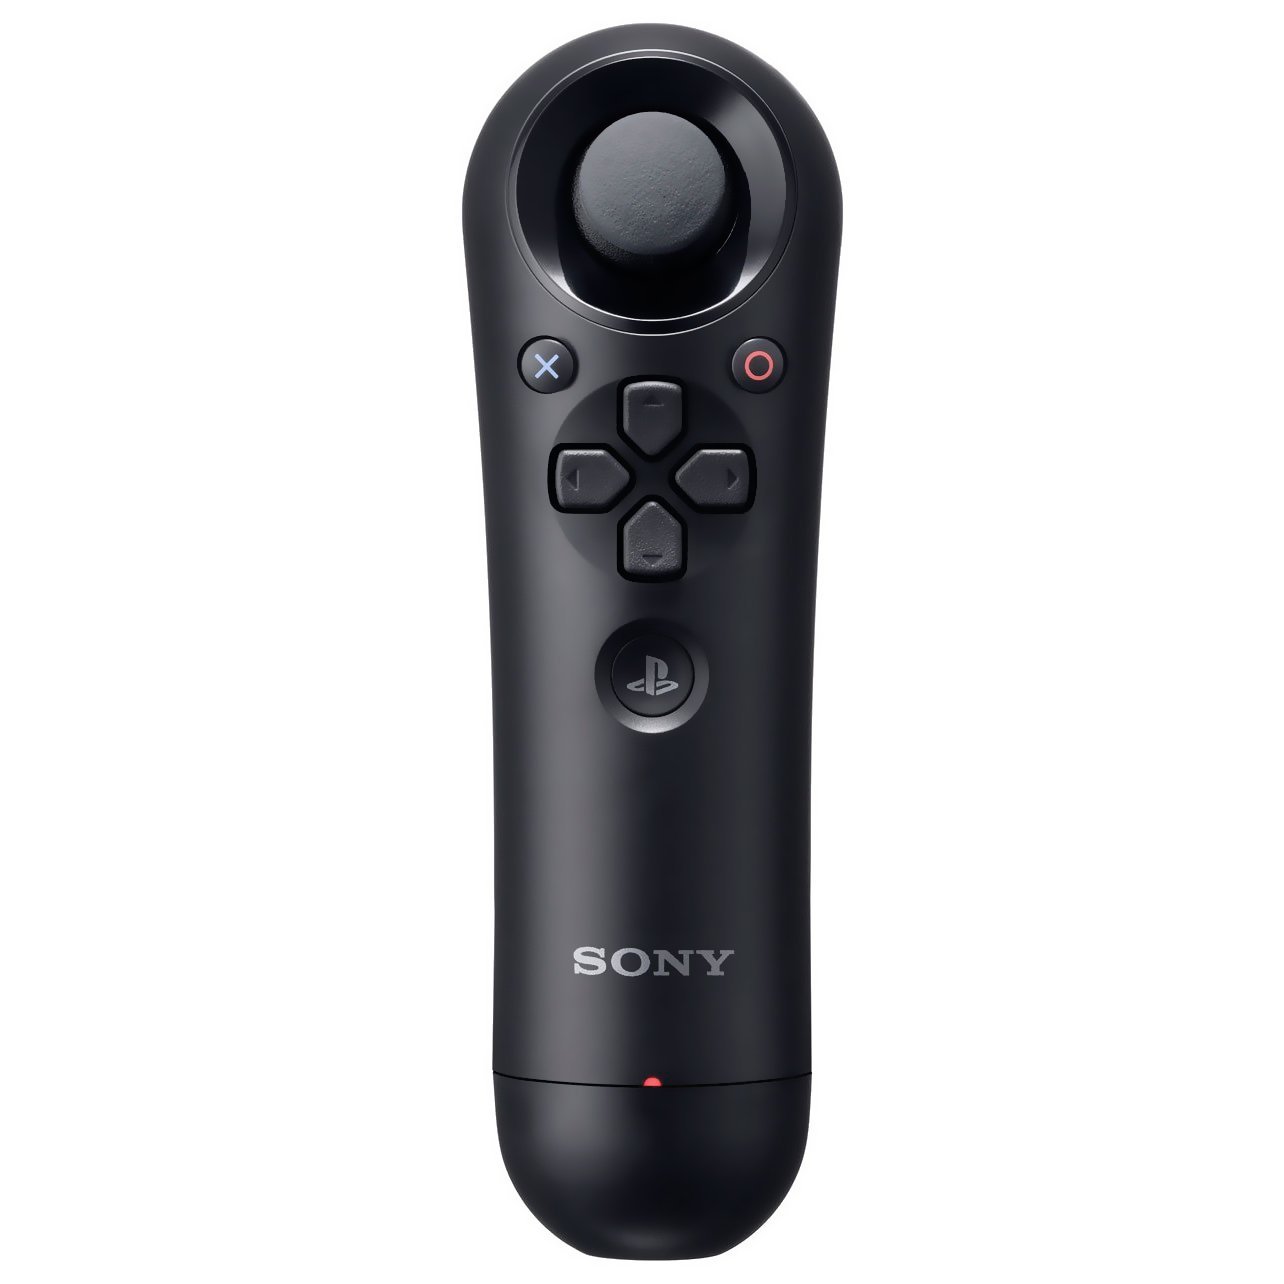 http://thetechjournal.com/wp-content/uploads/images/1109/1317051600-playstation-move-navigation-controller-1.jpg